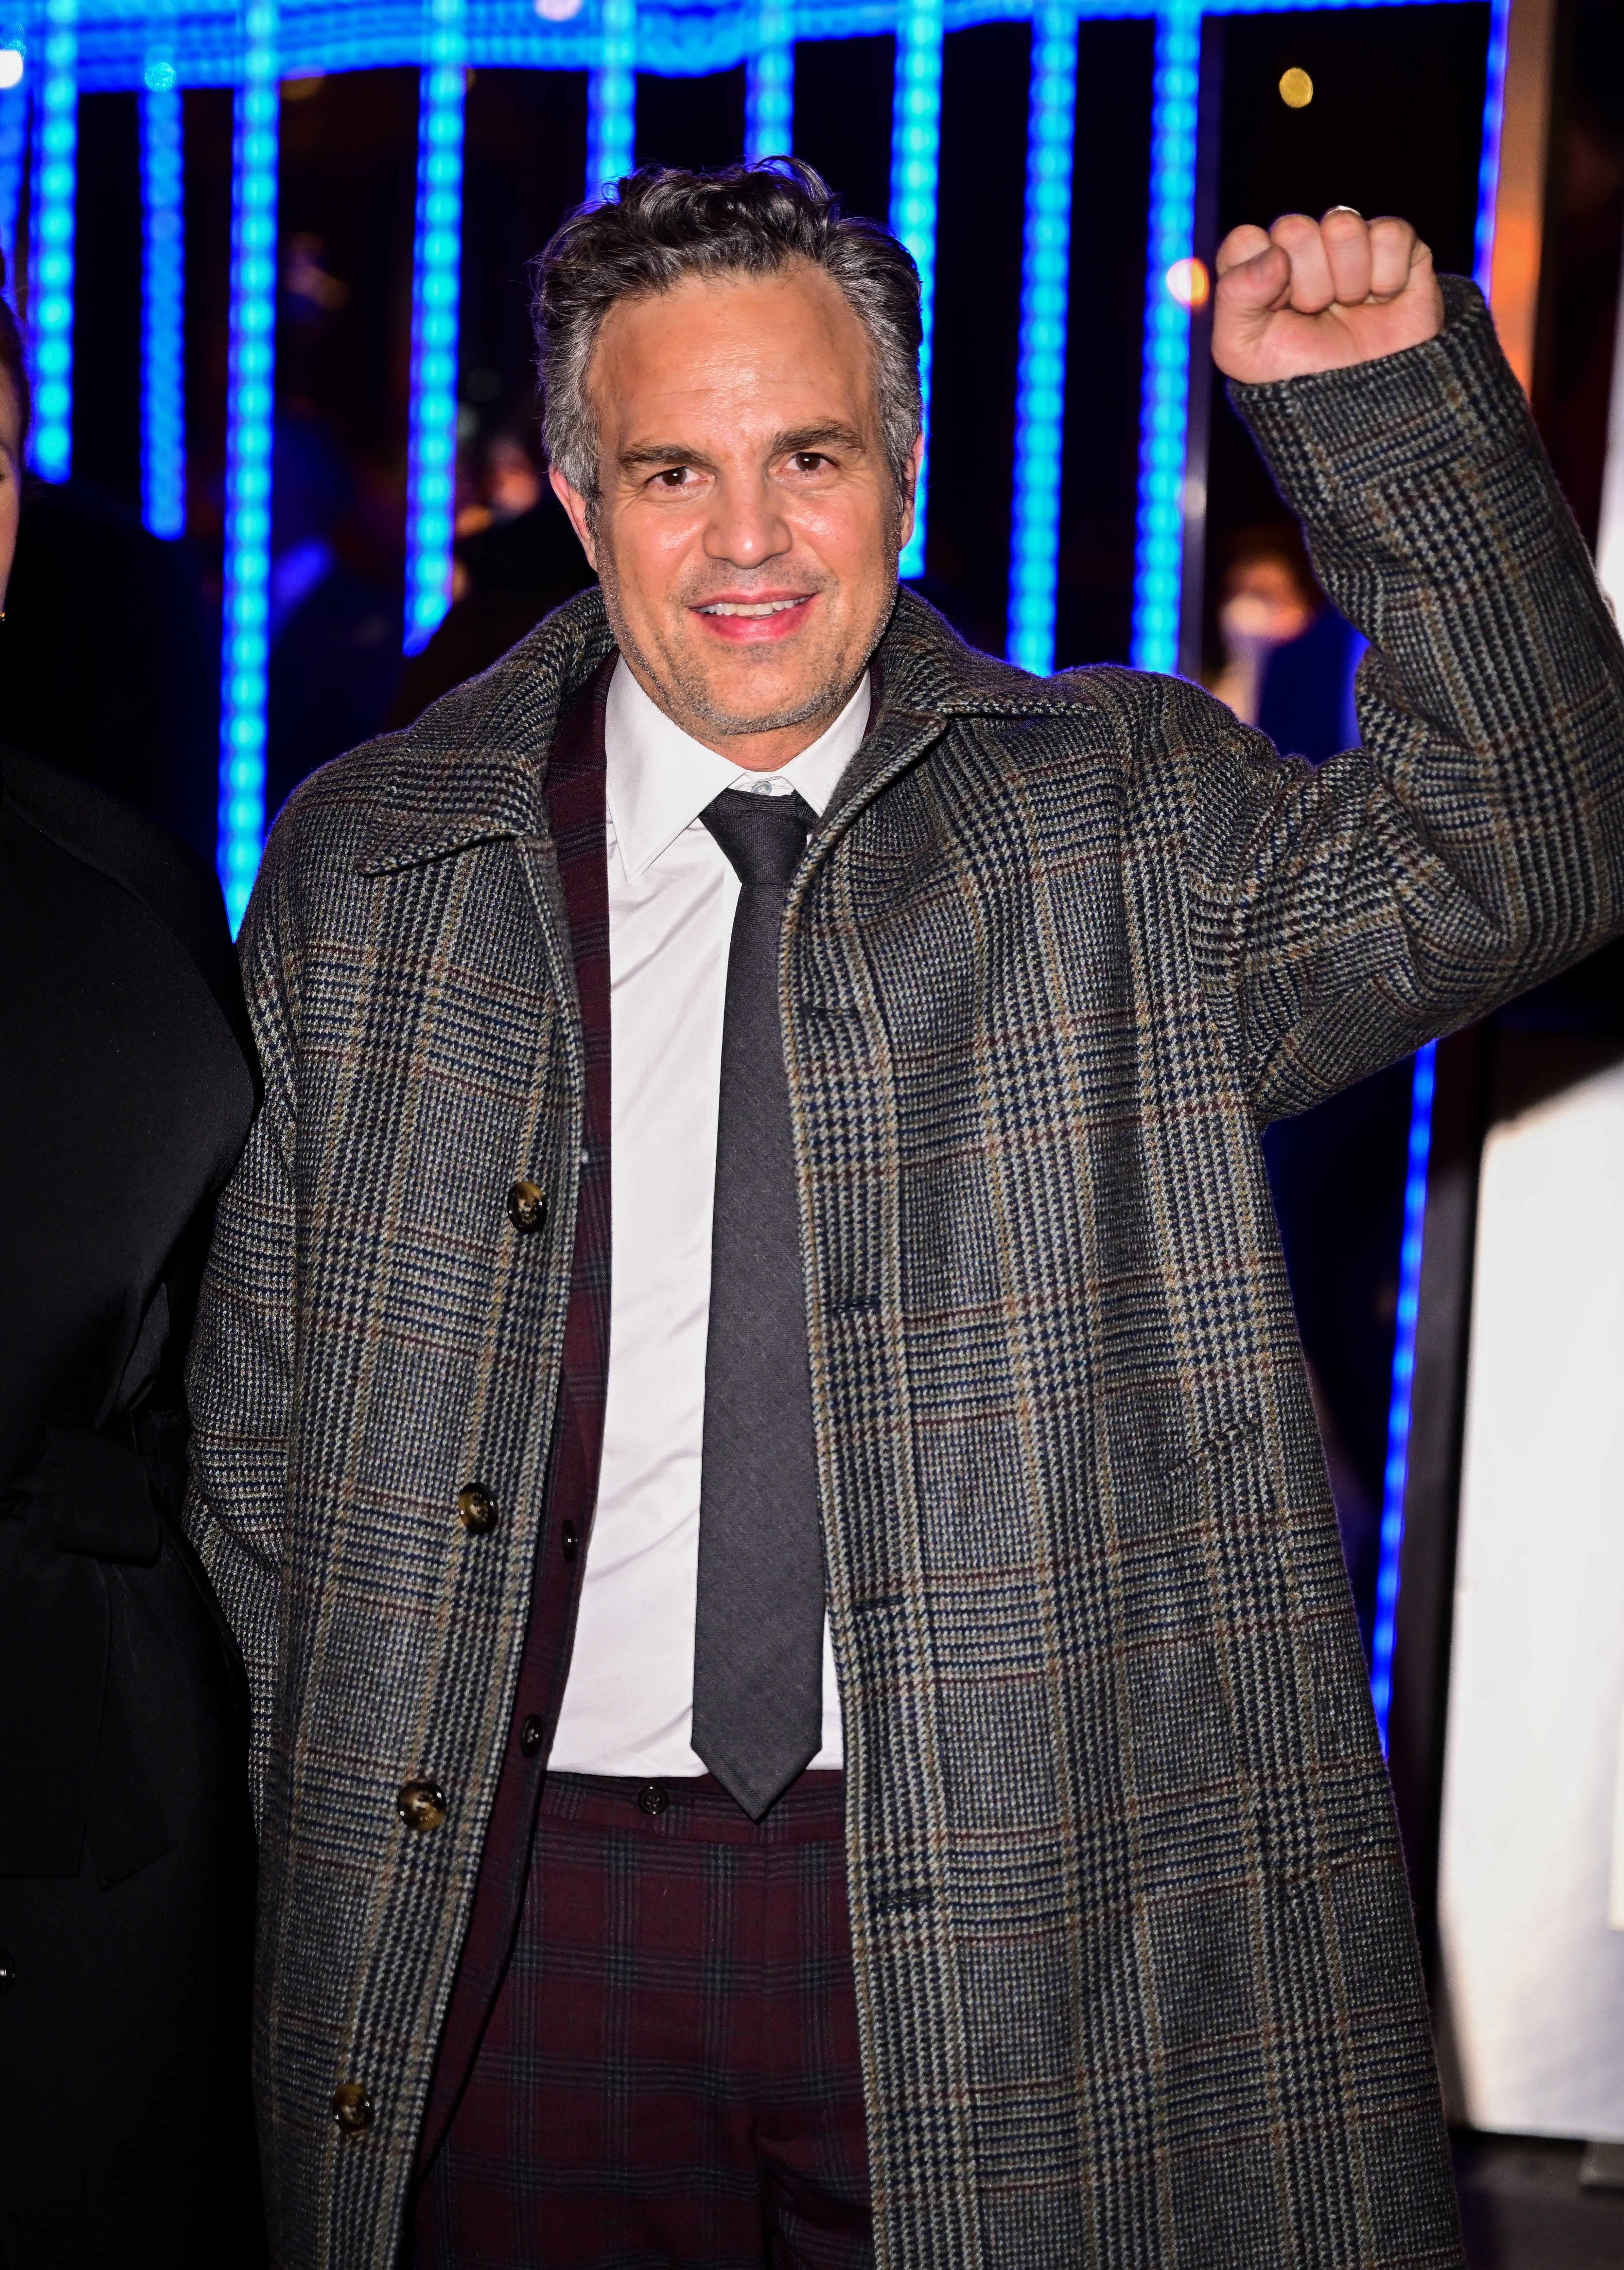 Mark Ruffalo arrives to the premiere of the "The Adam Project" at Alice Tully Hall on February 28, 2022 in New York City. | Source: Getty Images